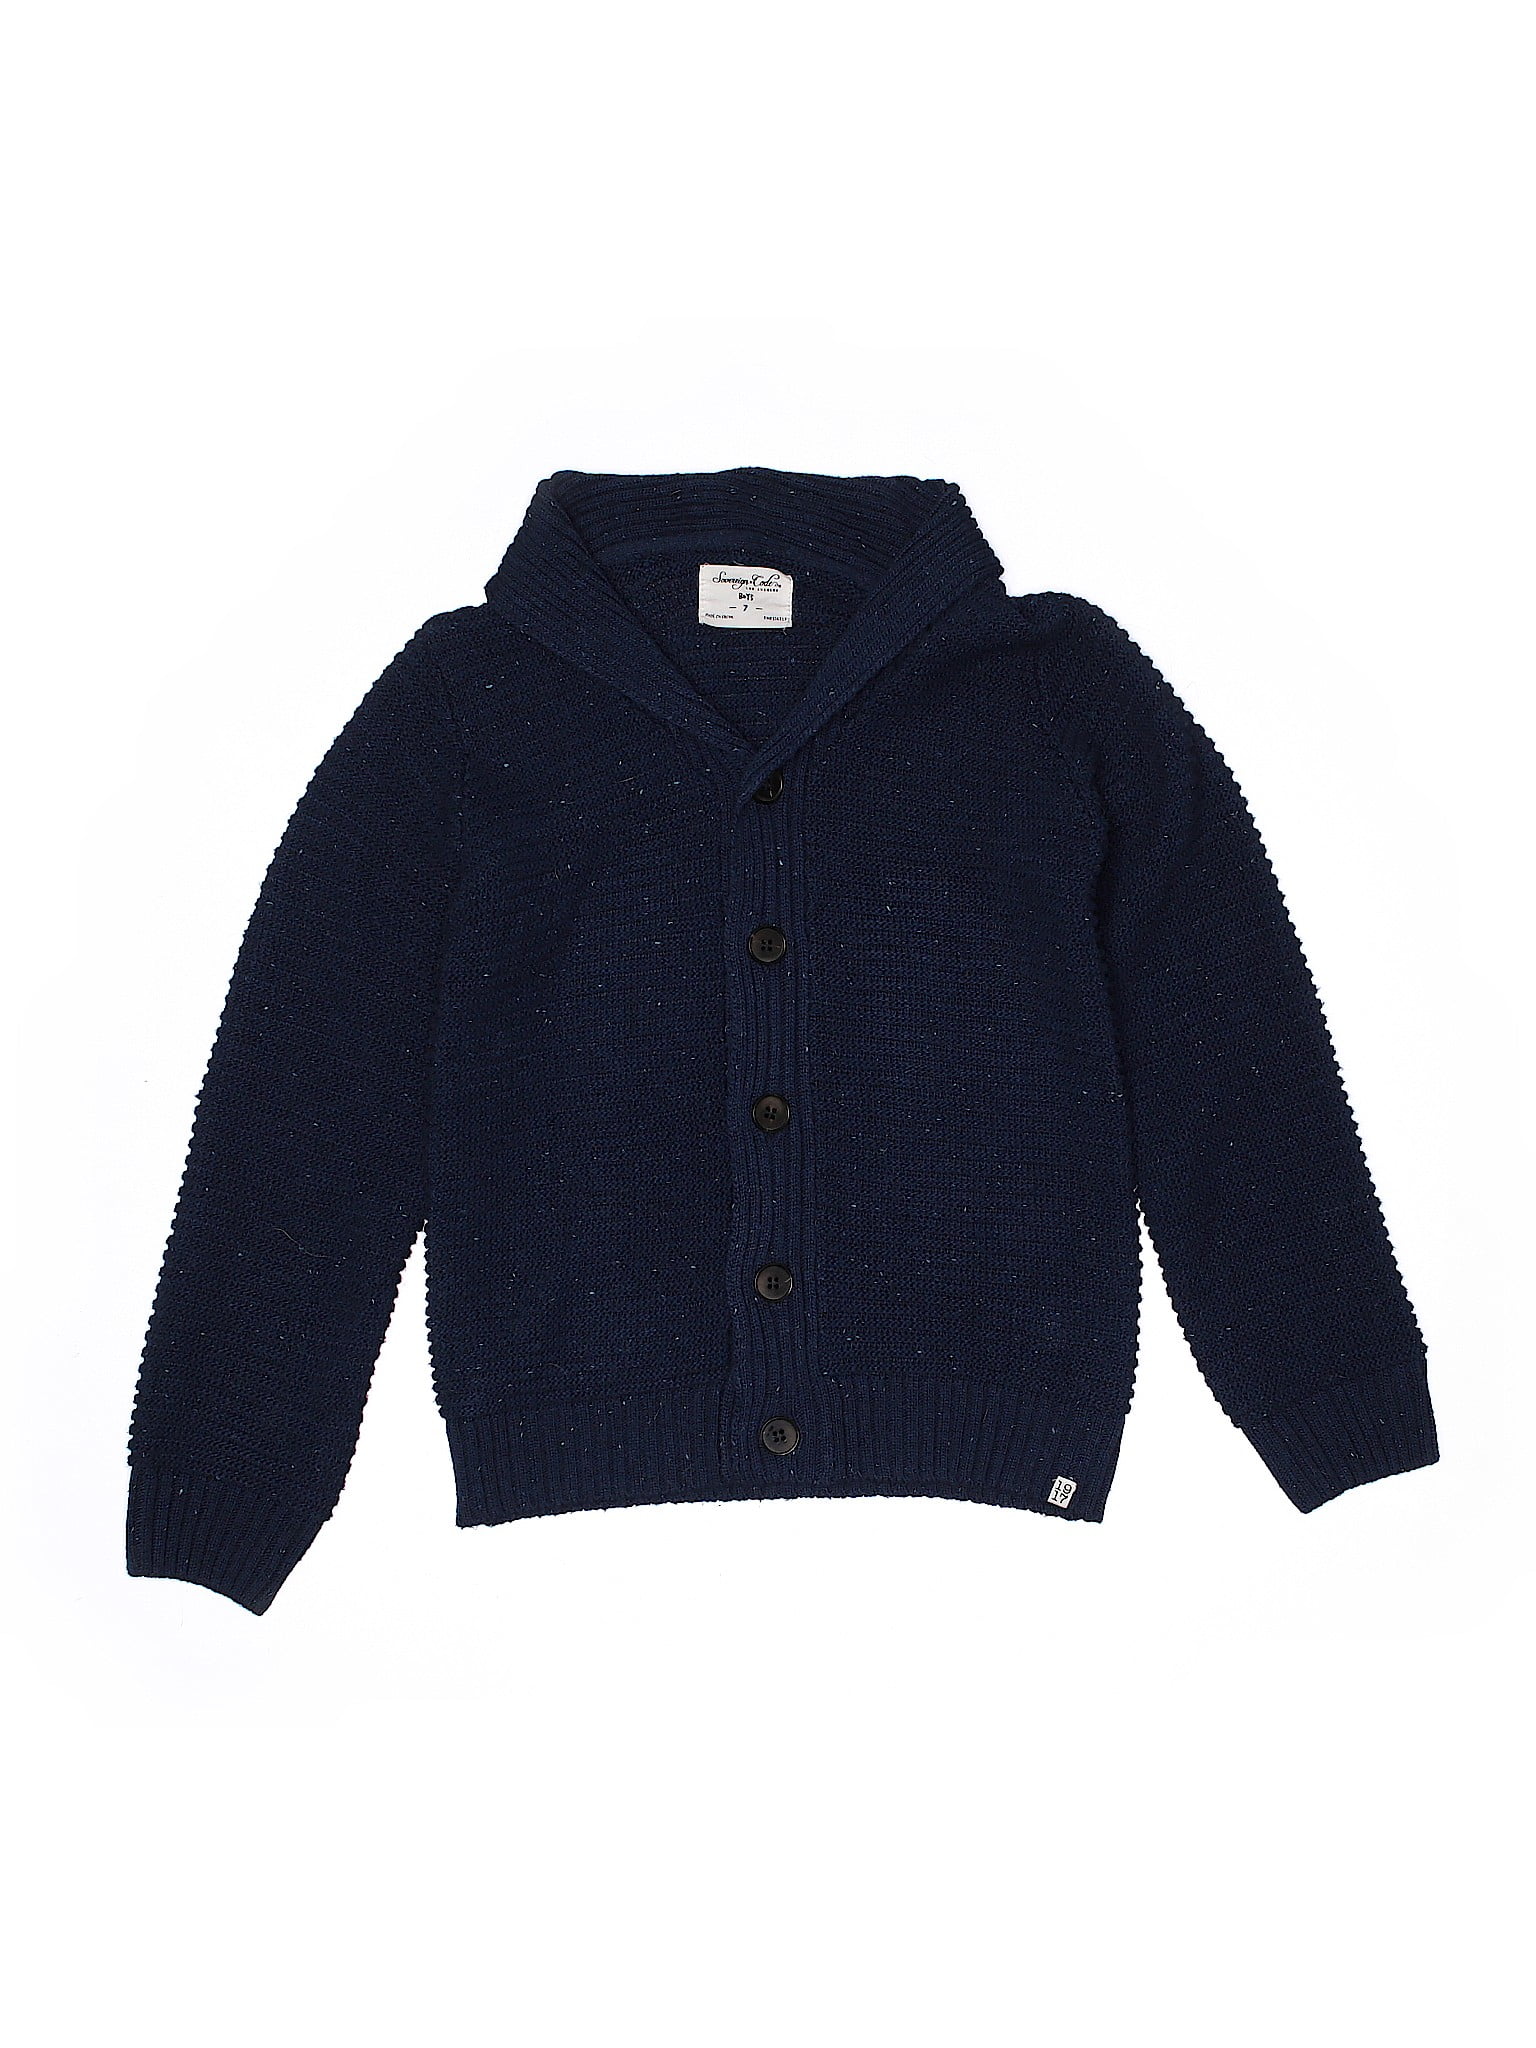 Sovereign Code - Pre-Owned Sovereign Code Boy's Size 7 Cardigan ...